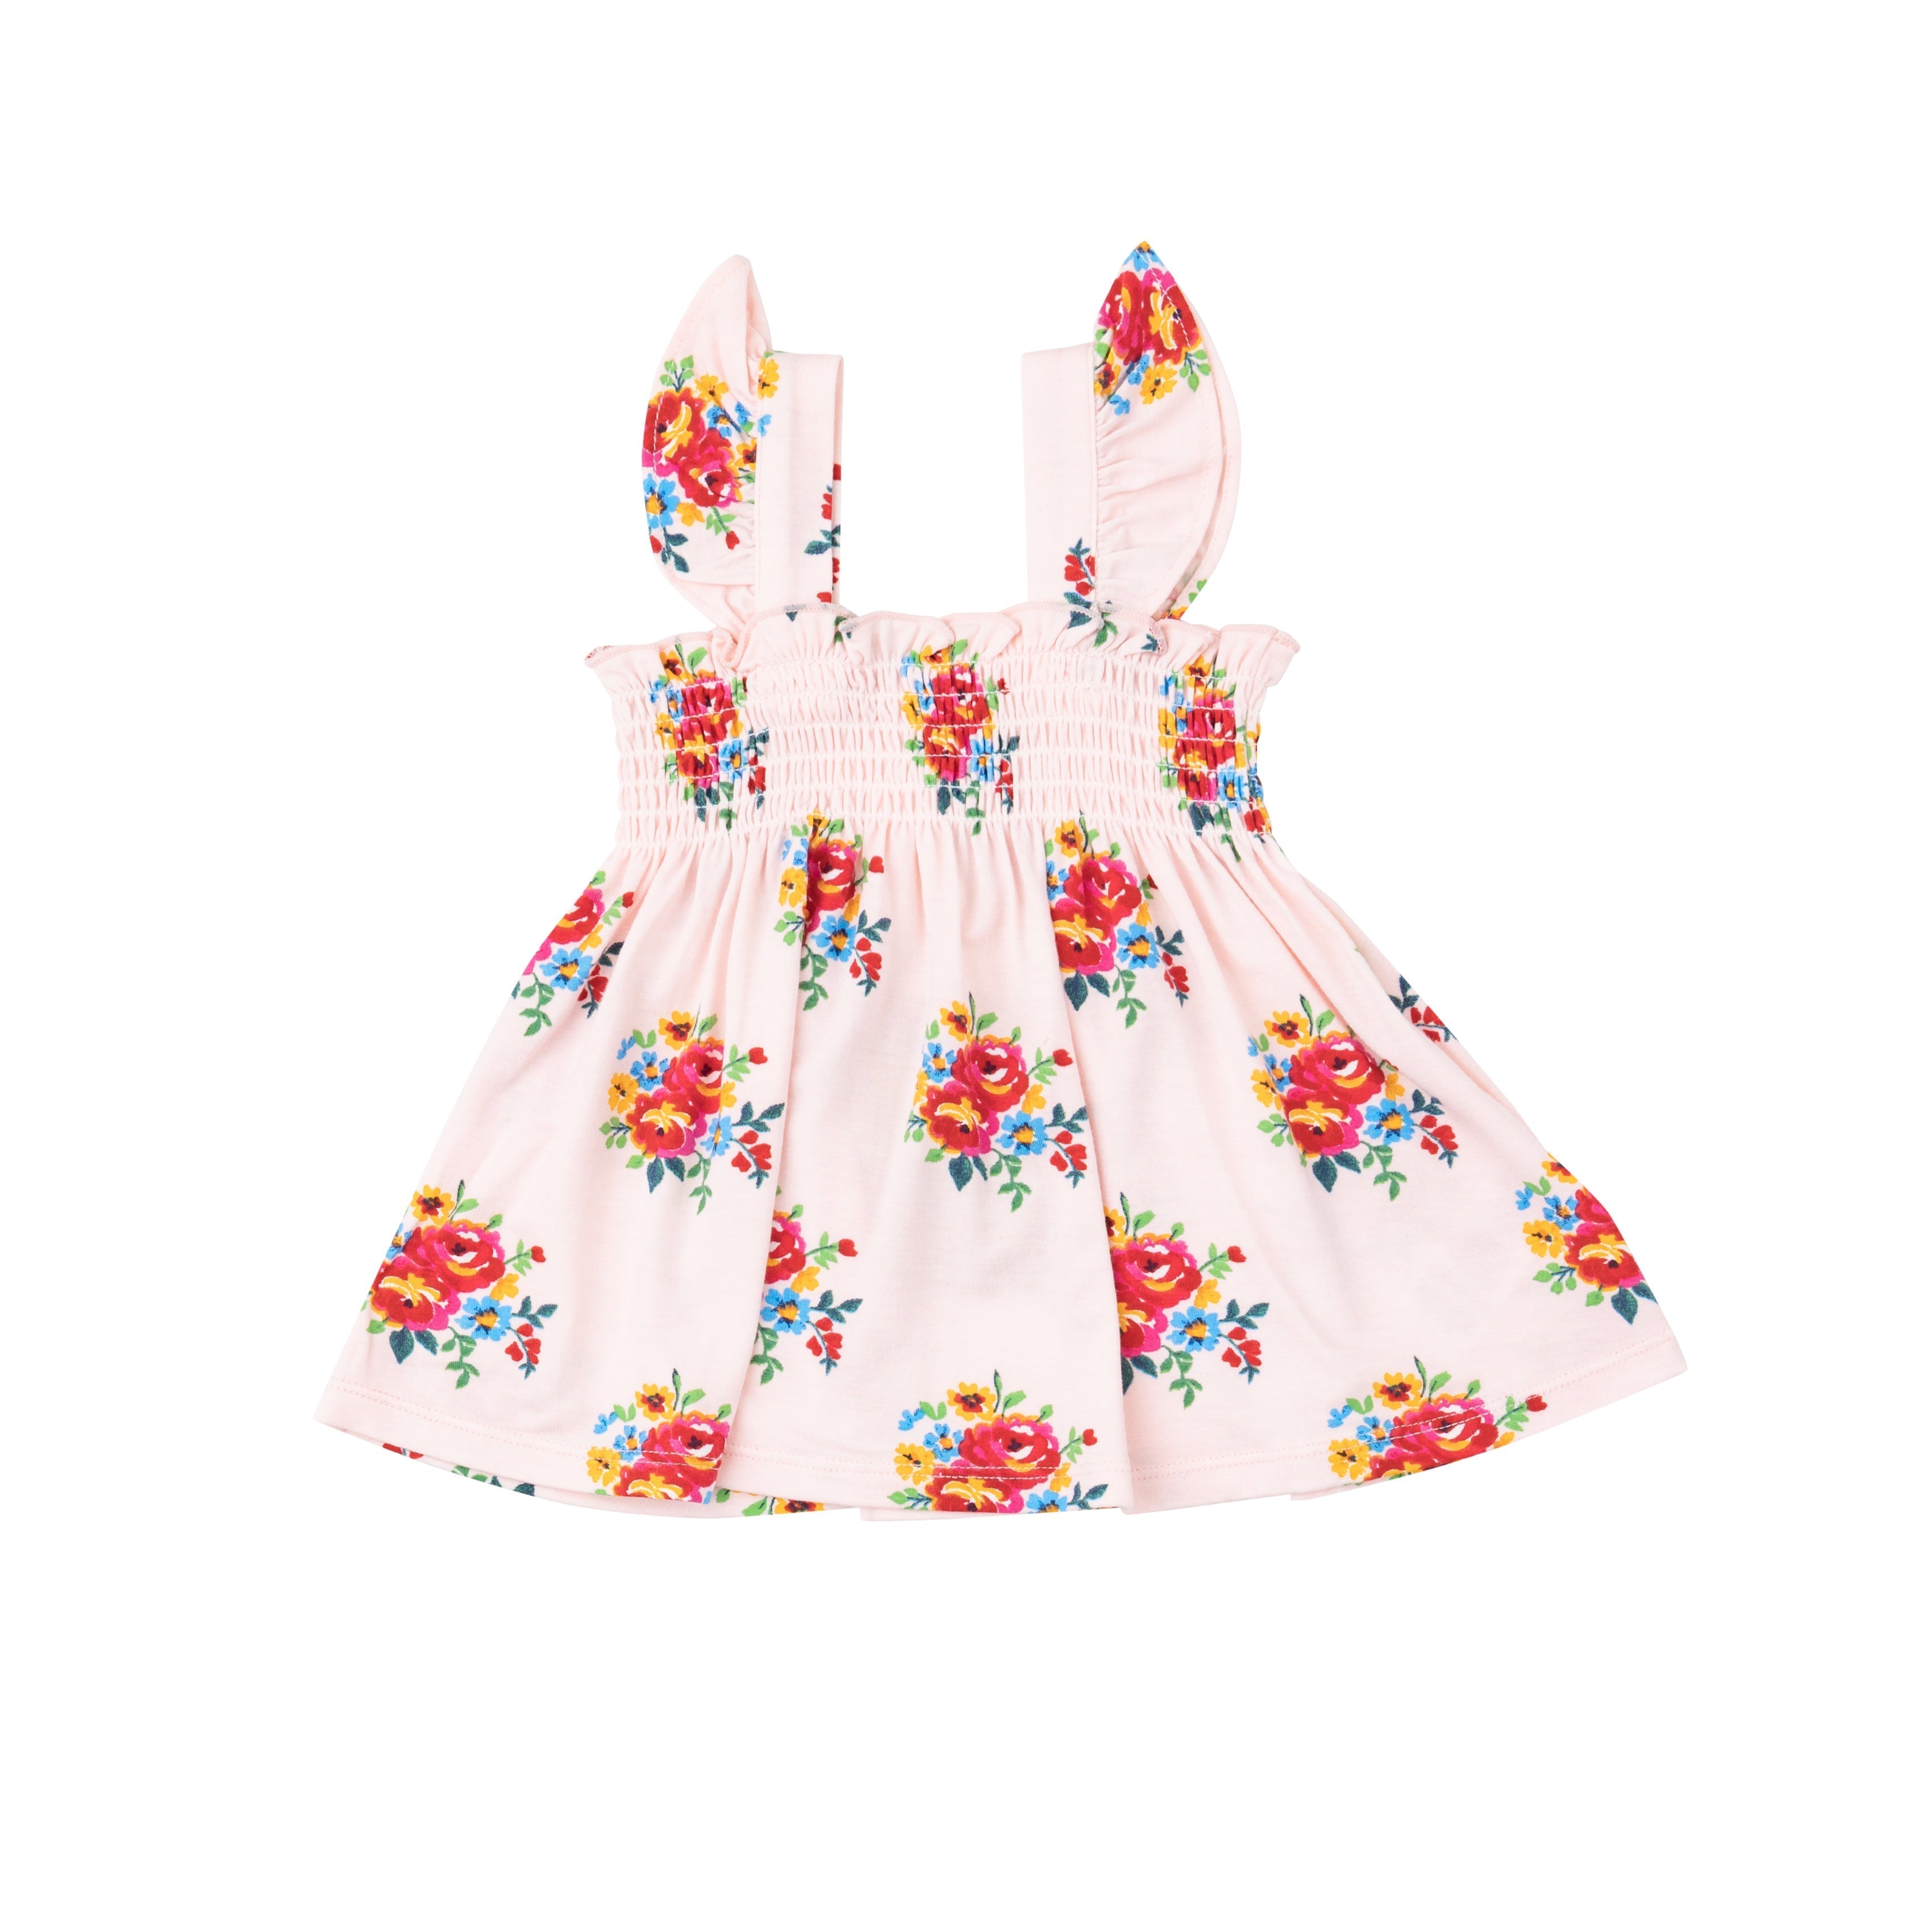 Ruffle Strap Smocked Top And Diaper Cover - Pretty Bouquets